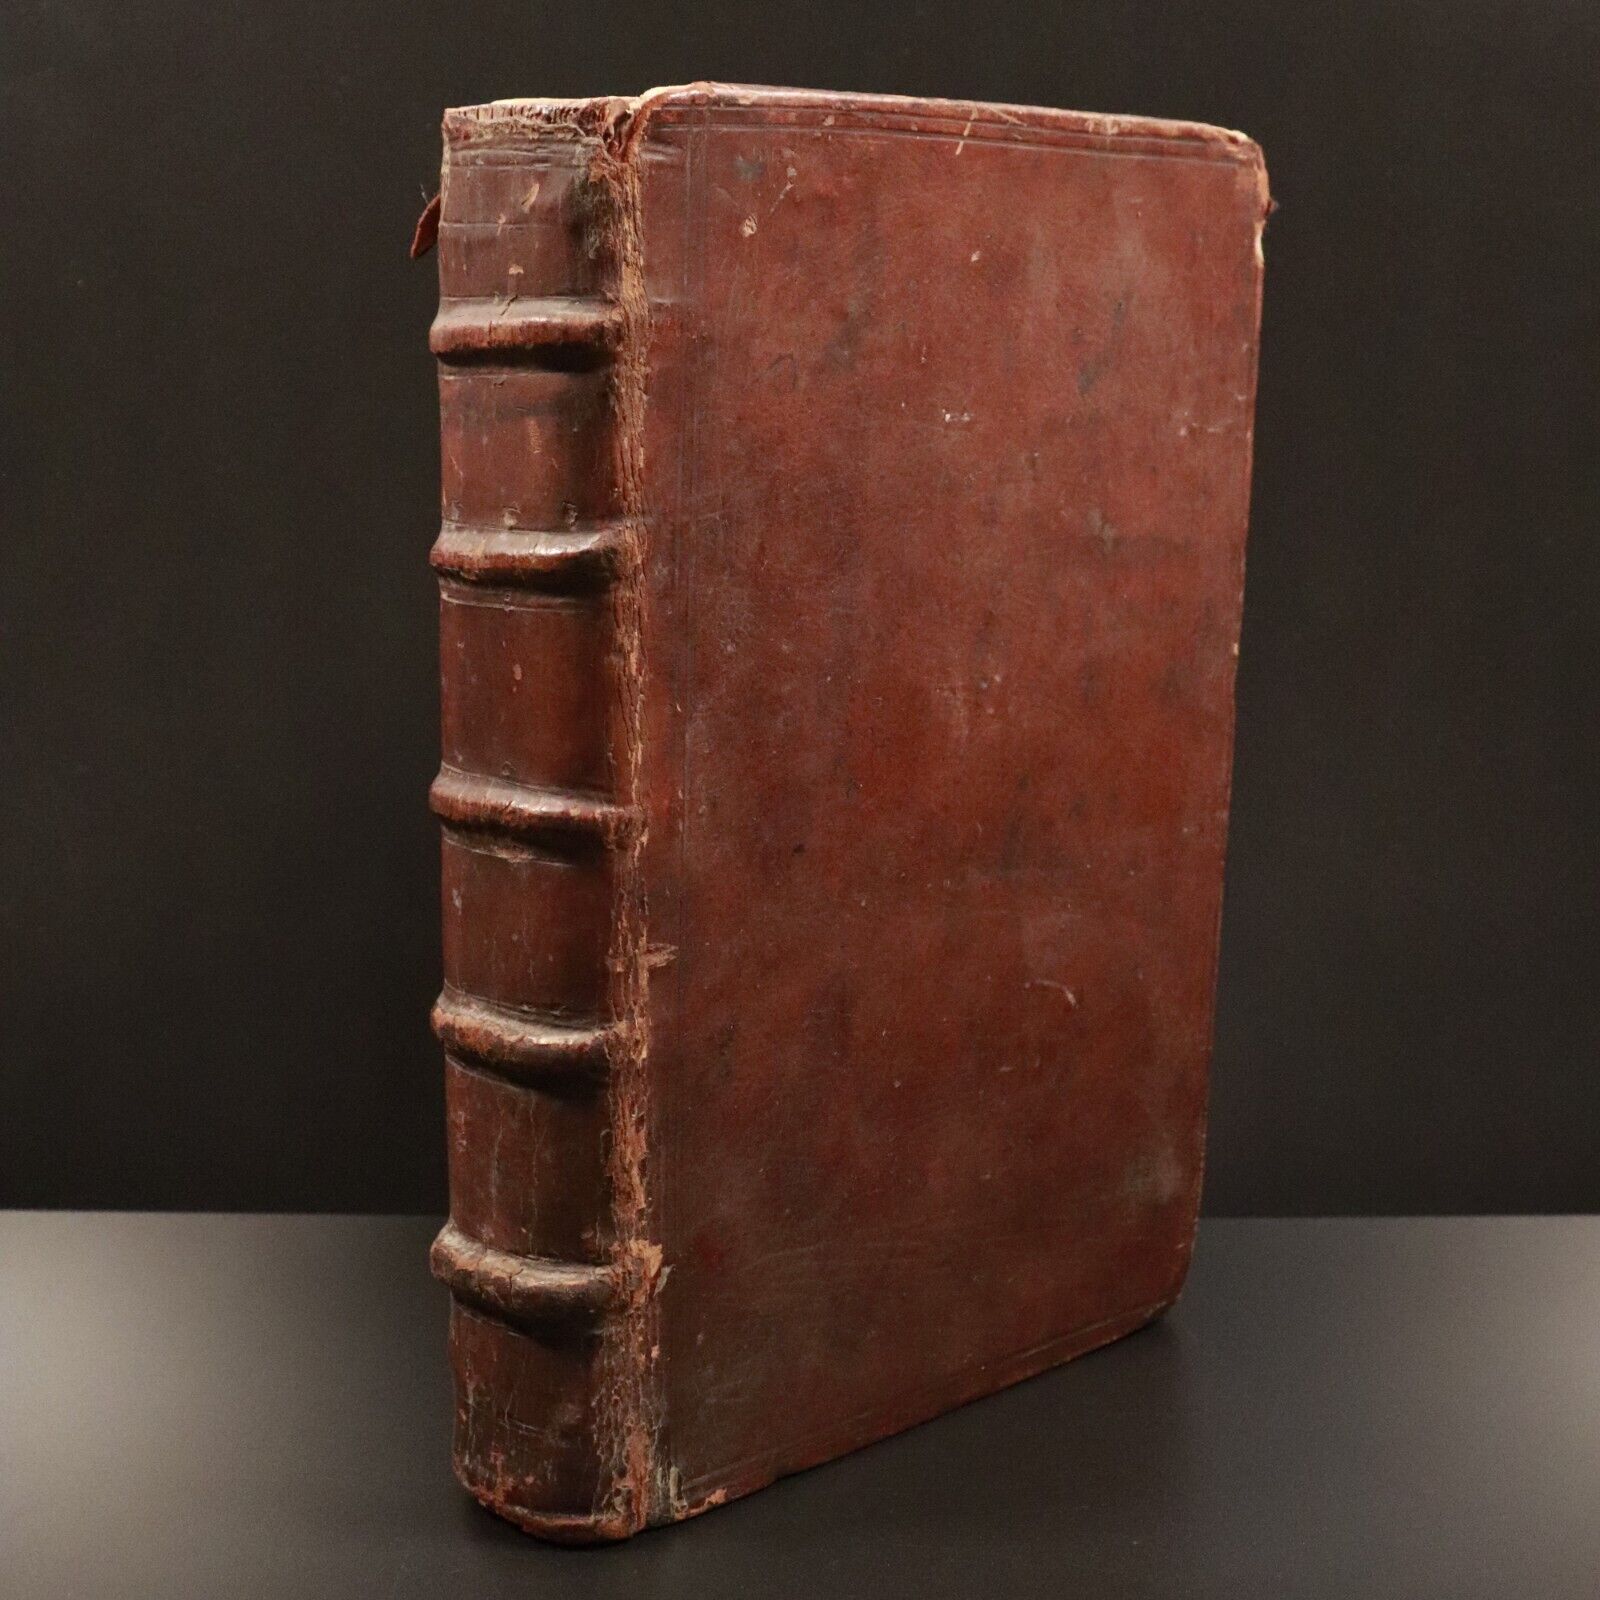 1632 The Anatomy Of Melancholy by Democritus Junior 4th Edition Antiquarian Book